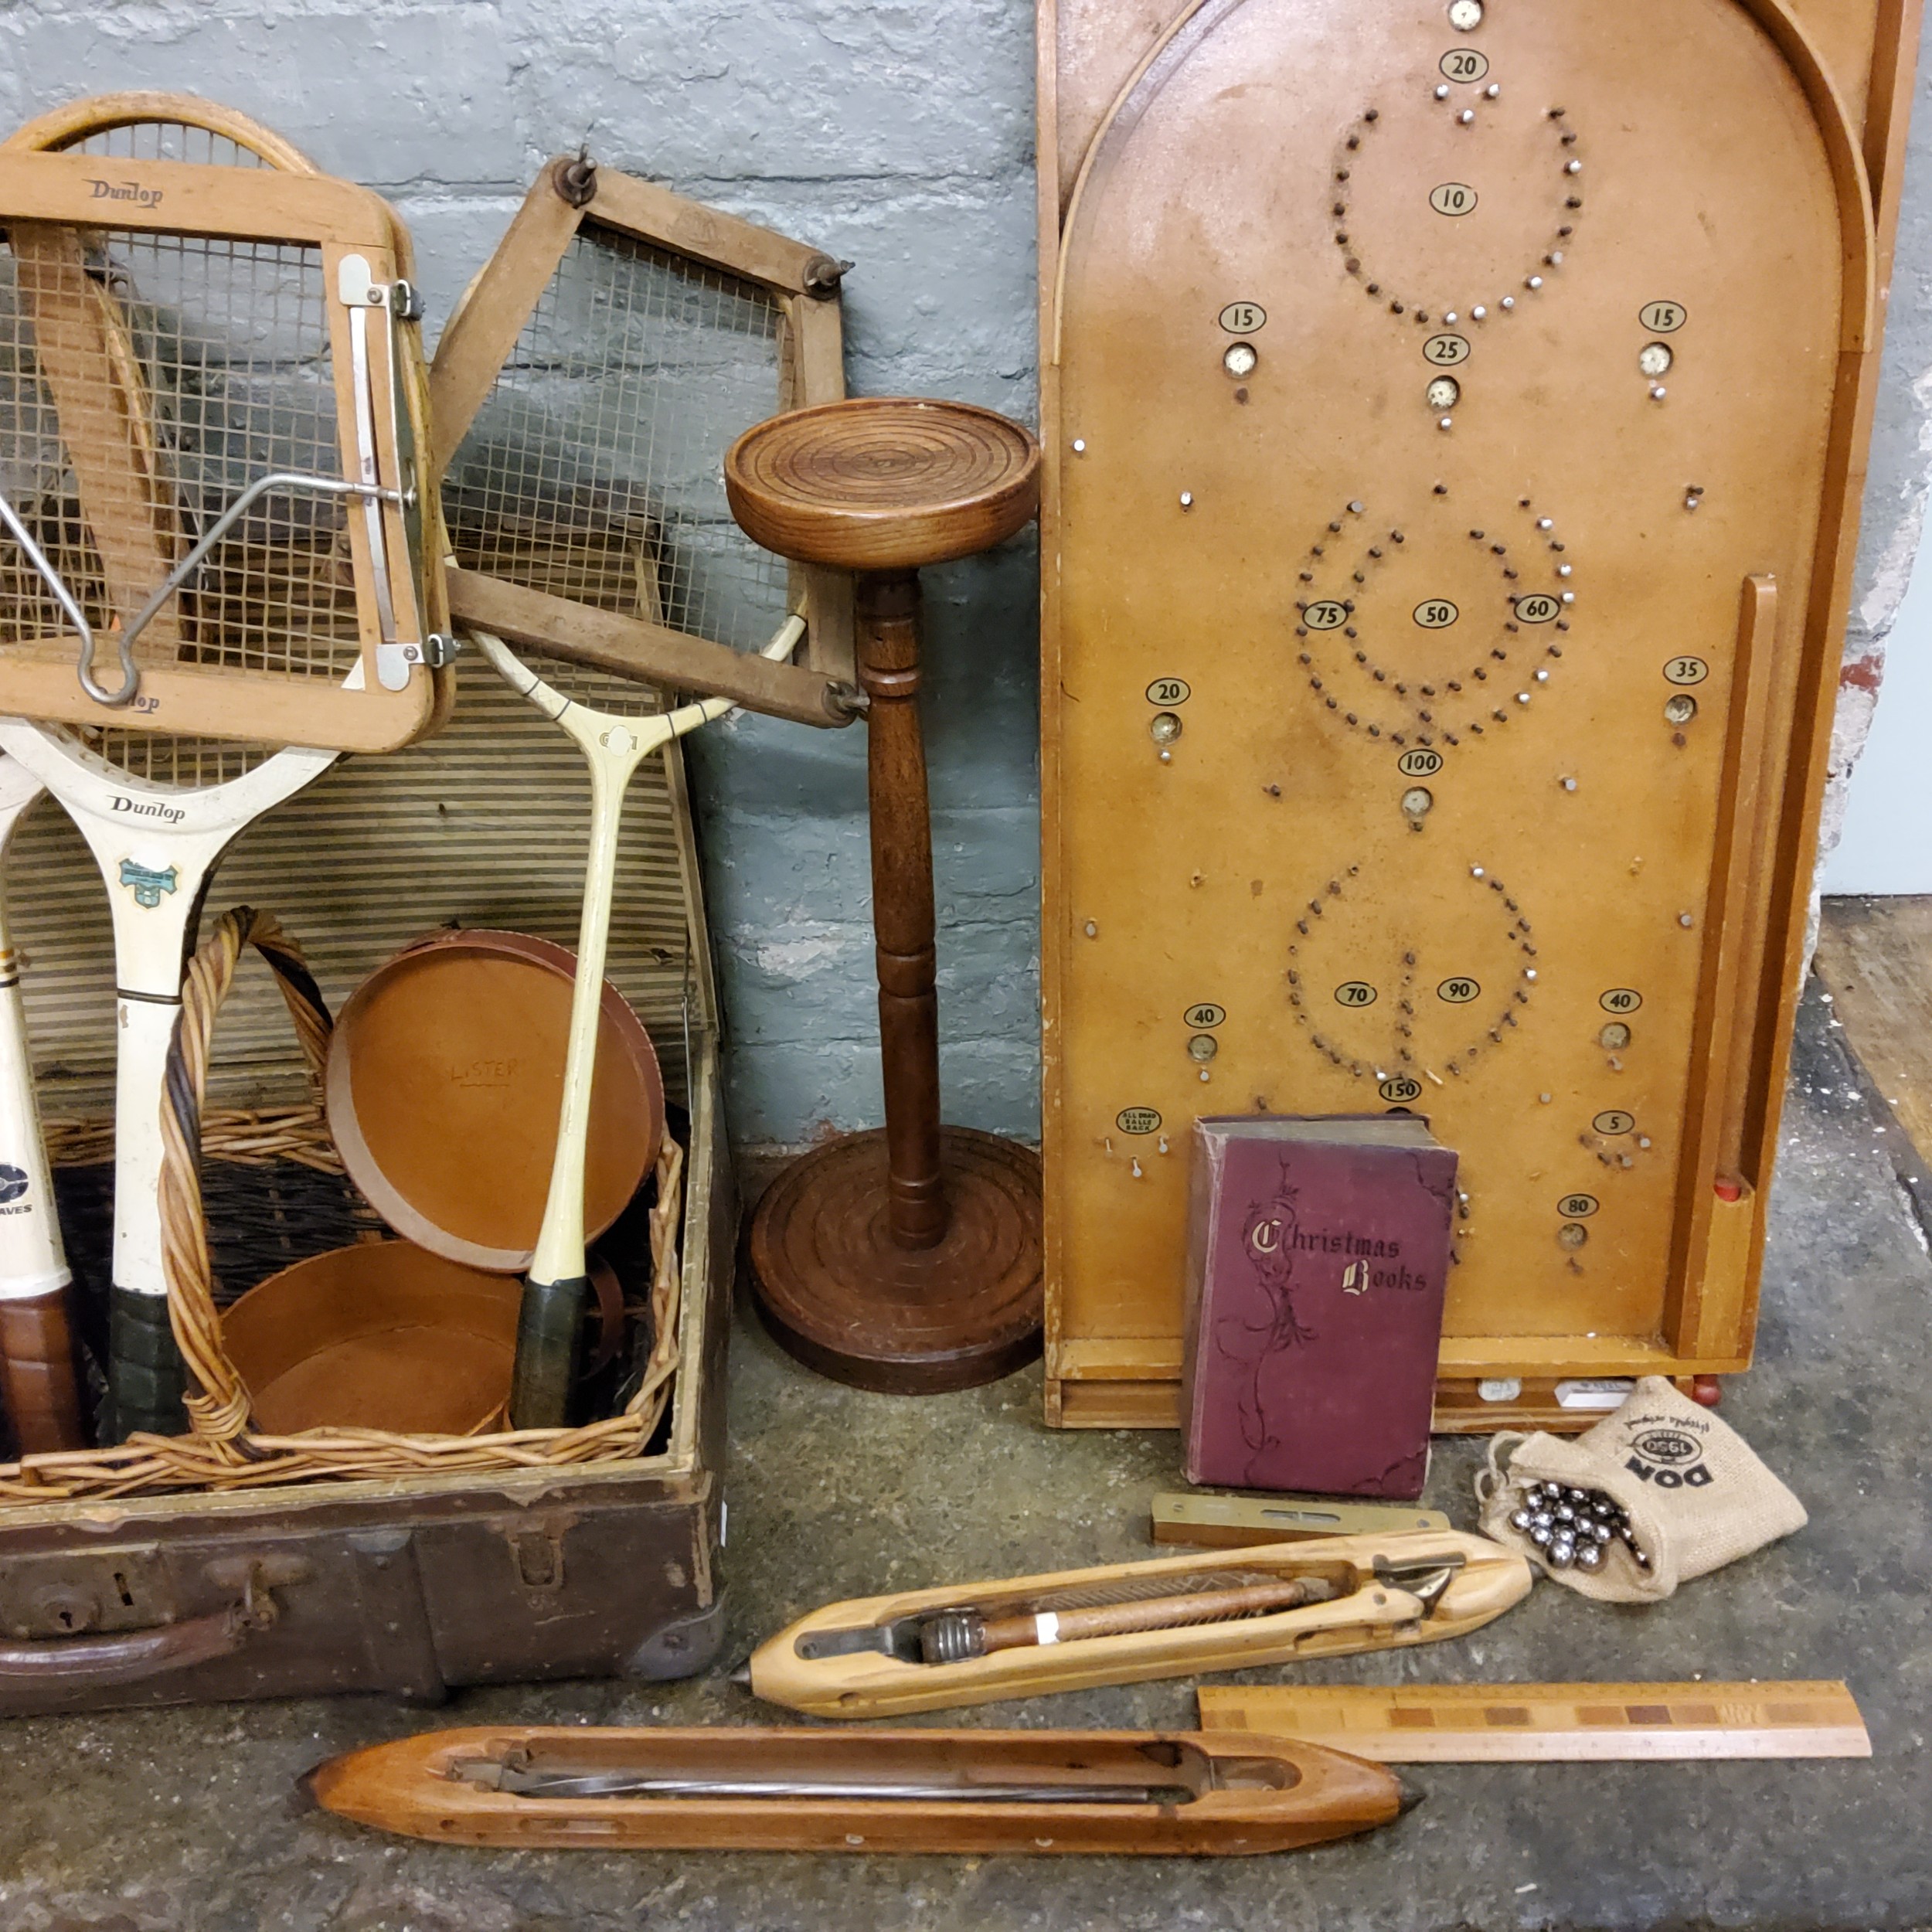 A Chad Valley Bagatelle board;  a Caravelle tennis racket; another, Dunlop;  an early 20th century - Image 2 of 3